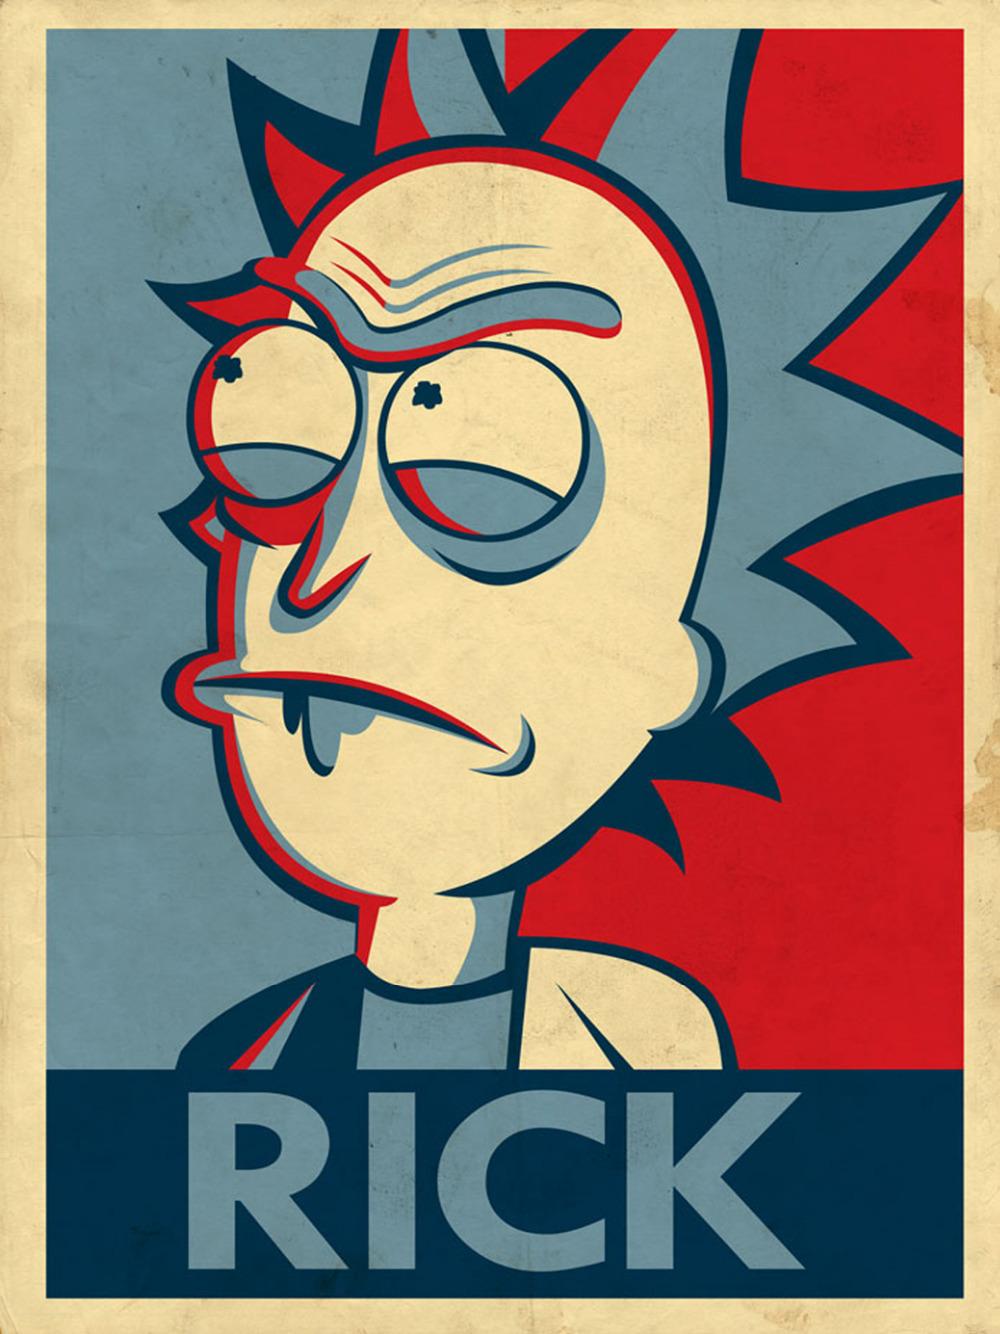 HD Rick and Morty Wallpapers APK for Android Download